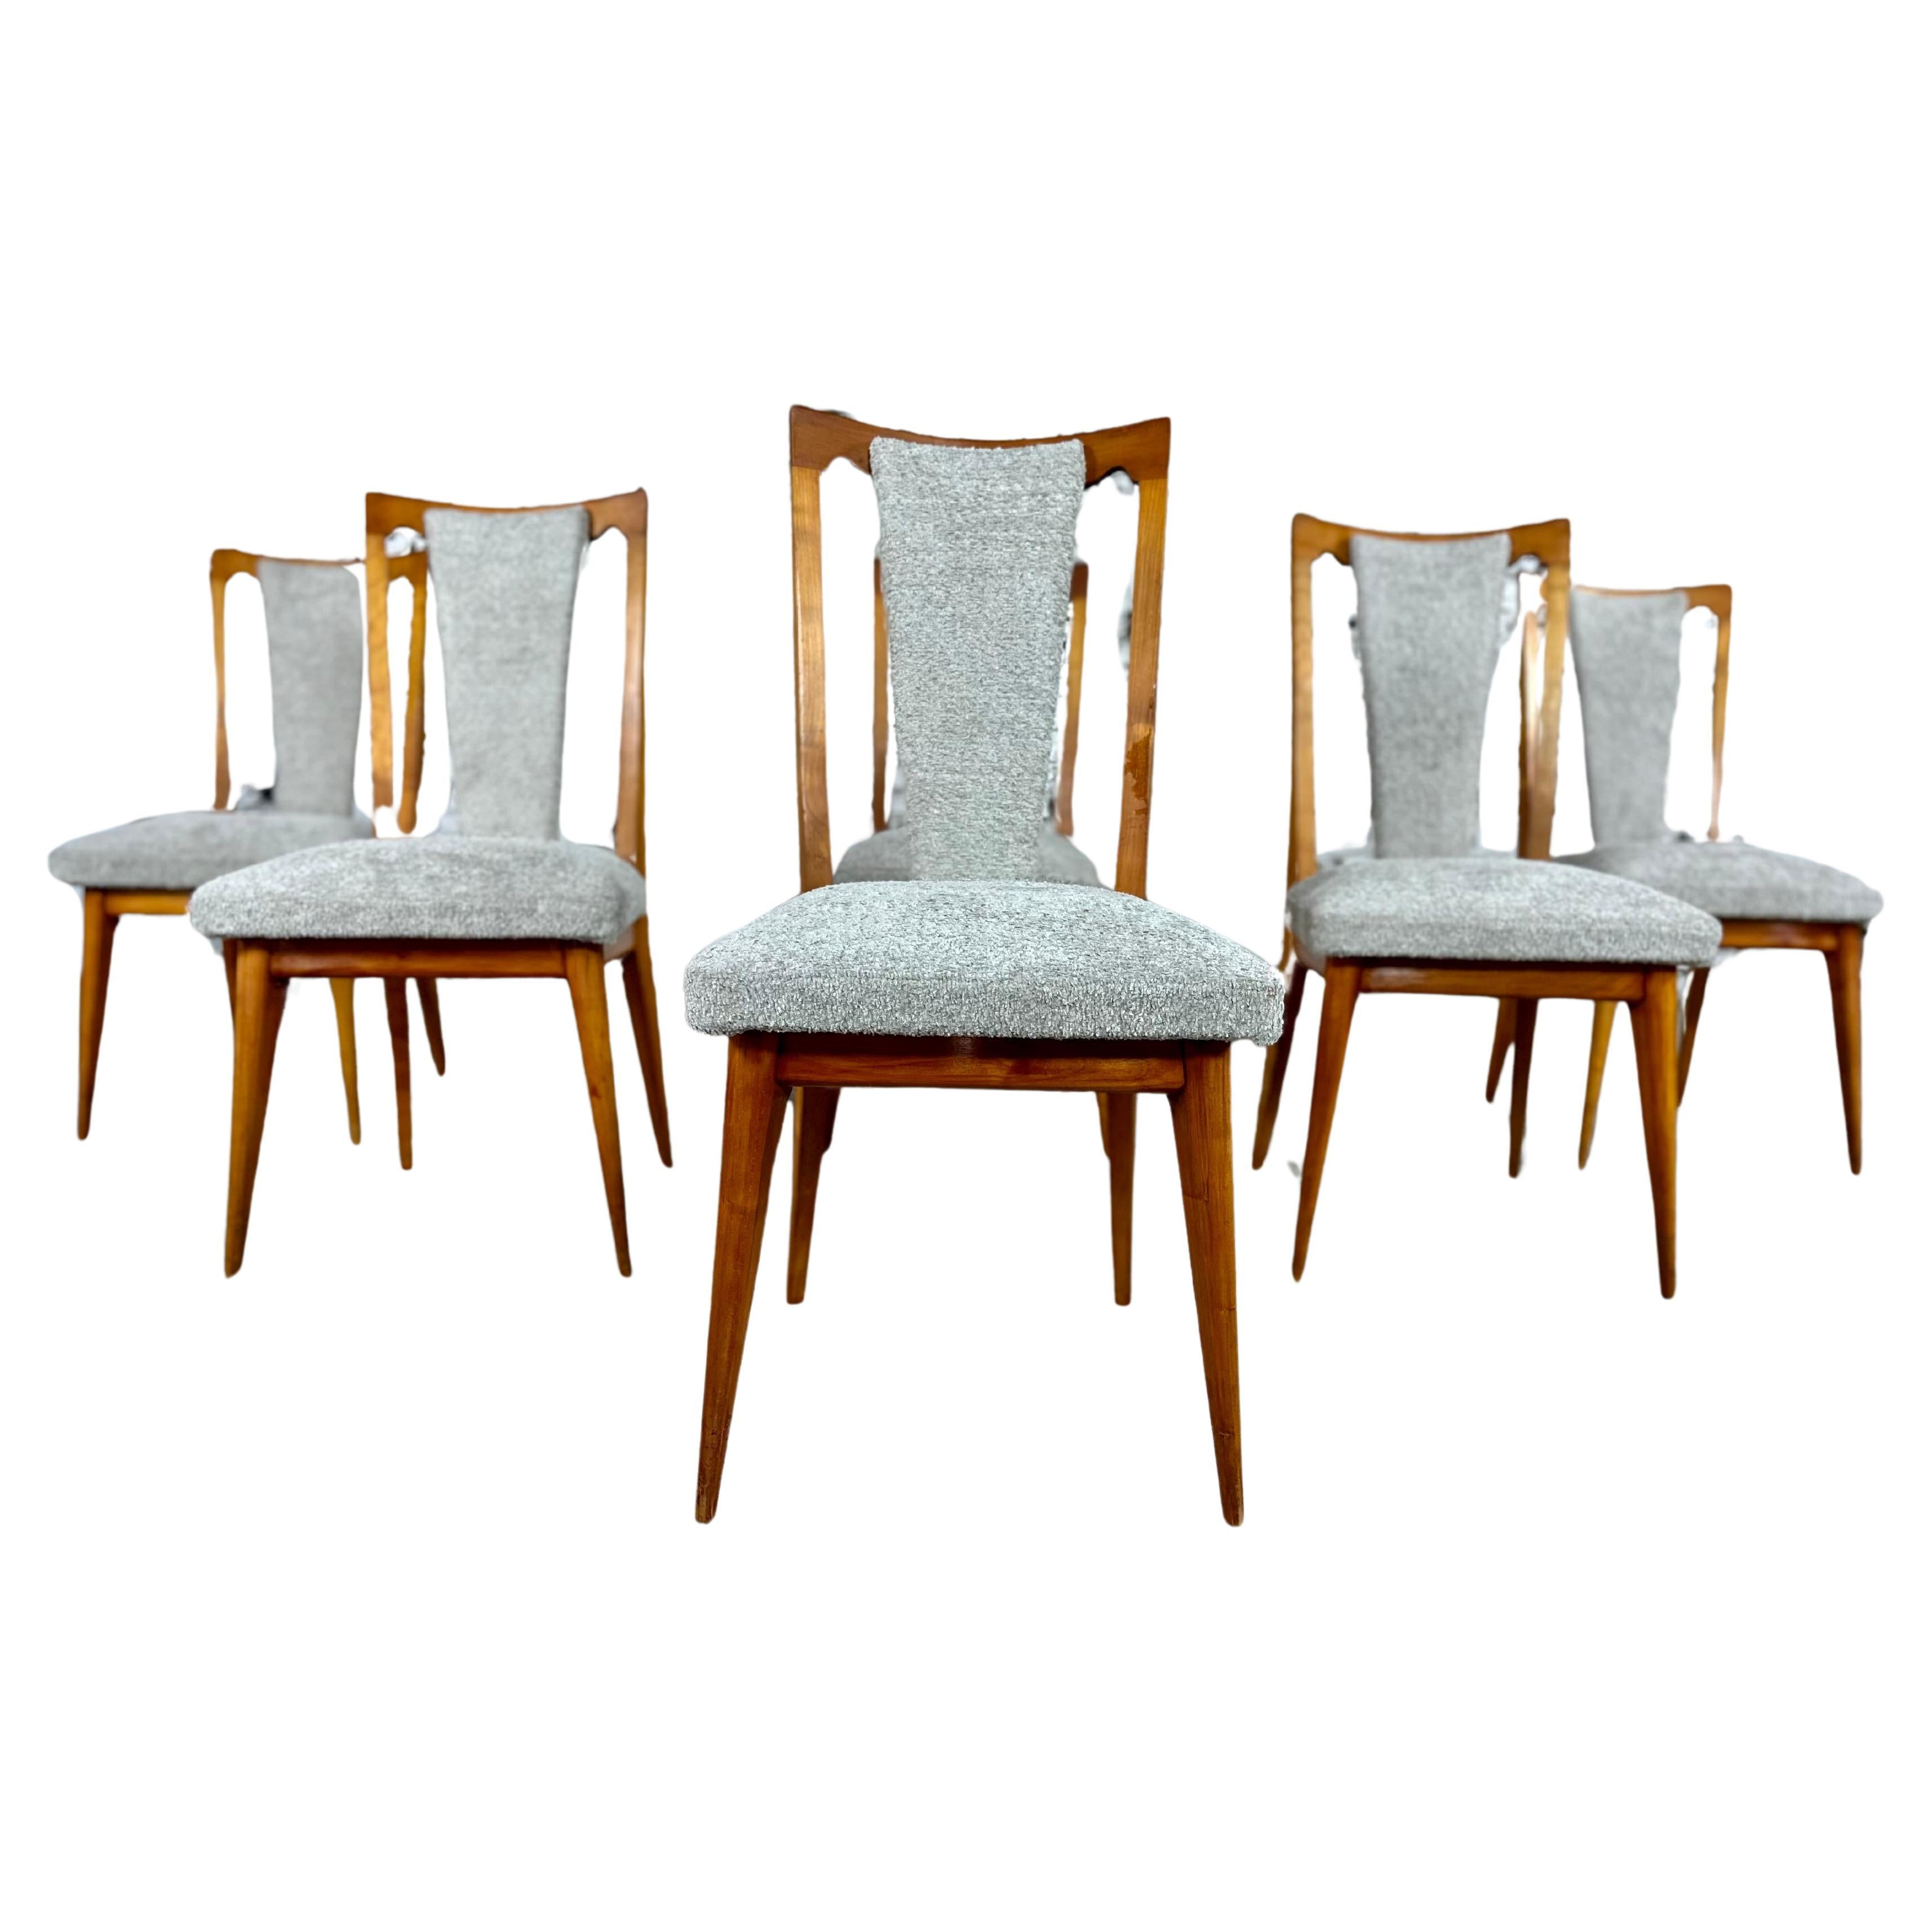 French Art Deco Styled Dining Chairs, Newly Upholstered - Set of 6